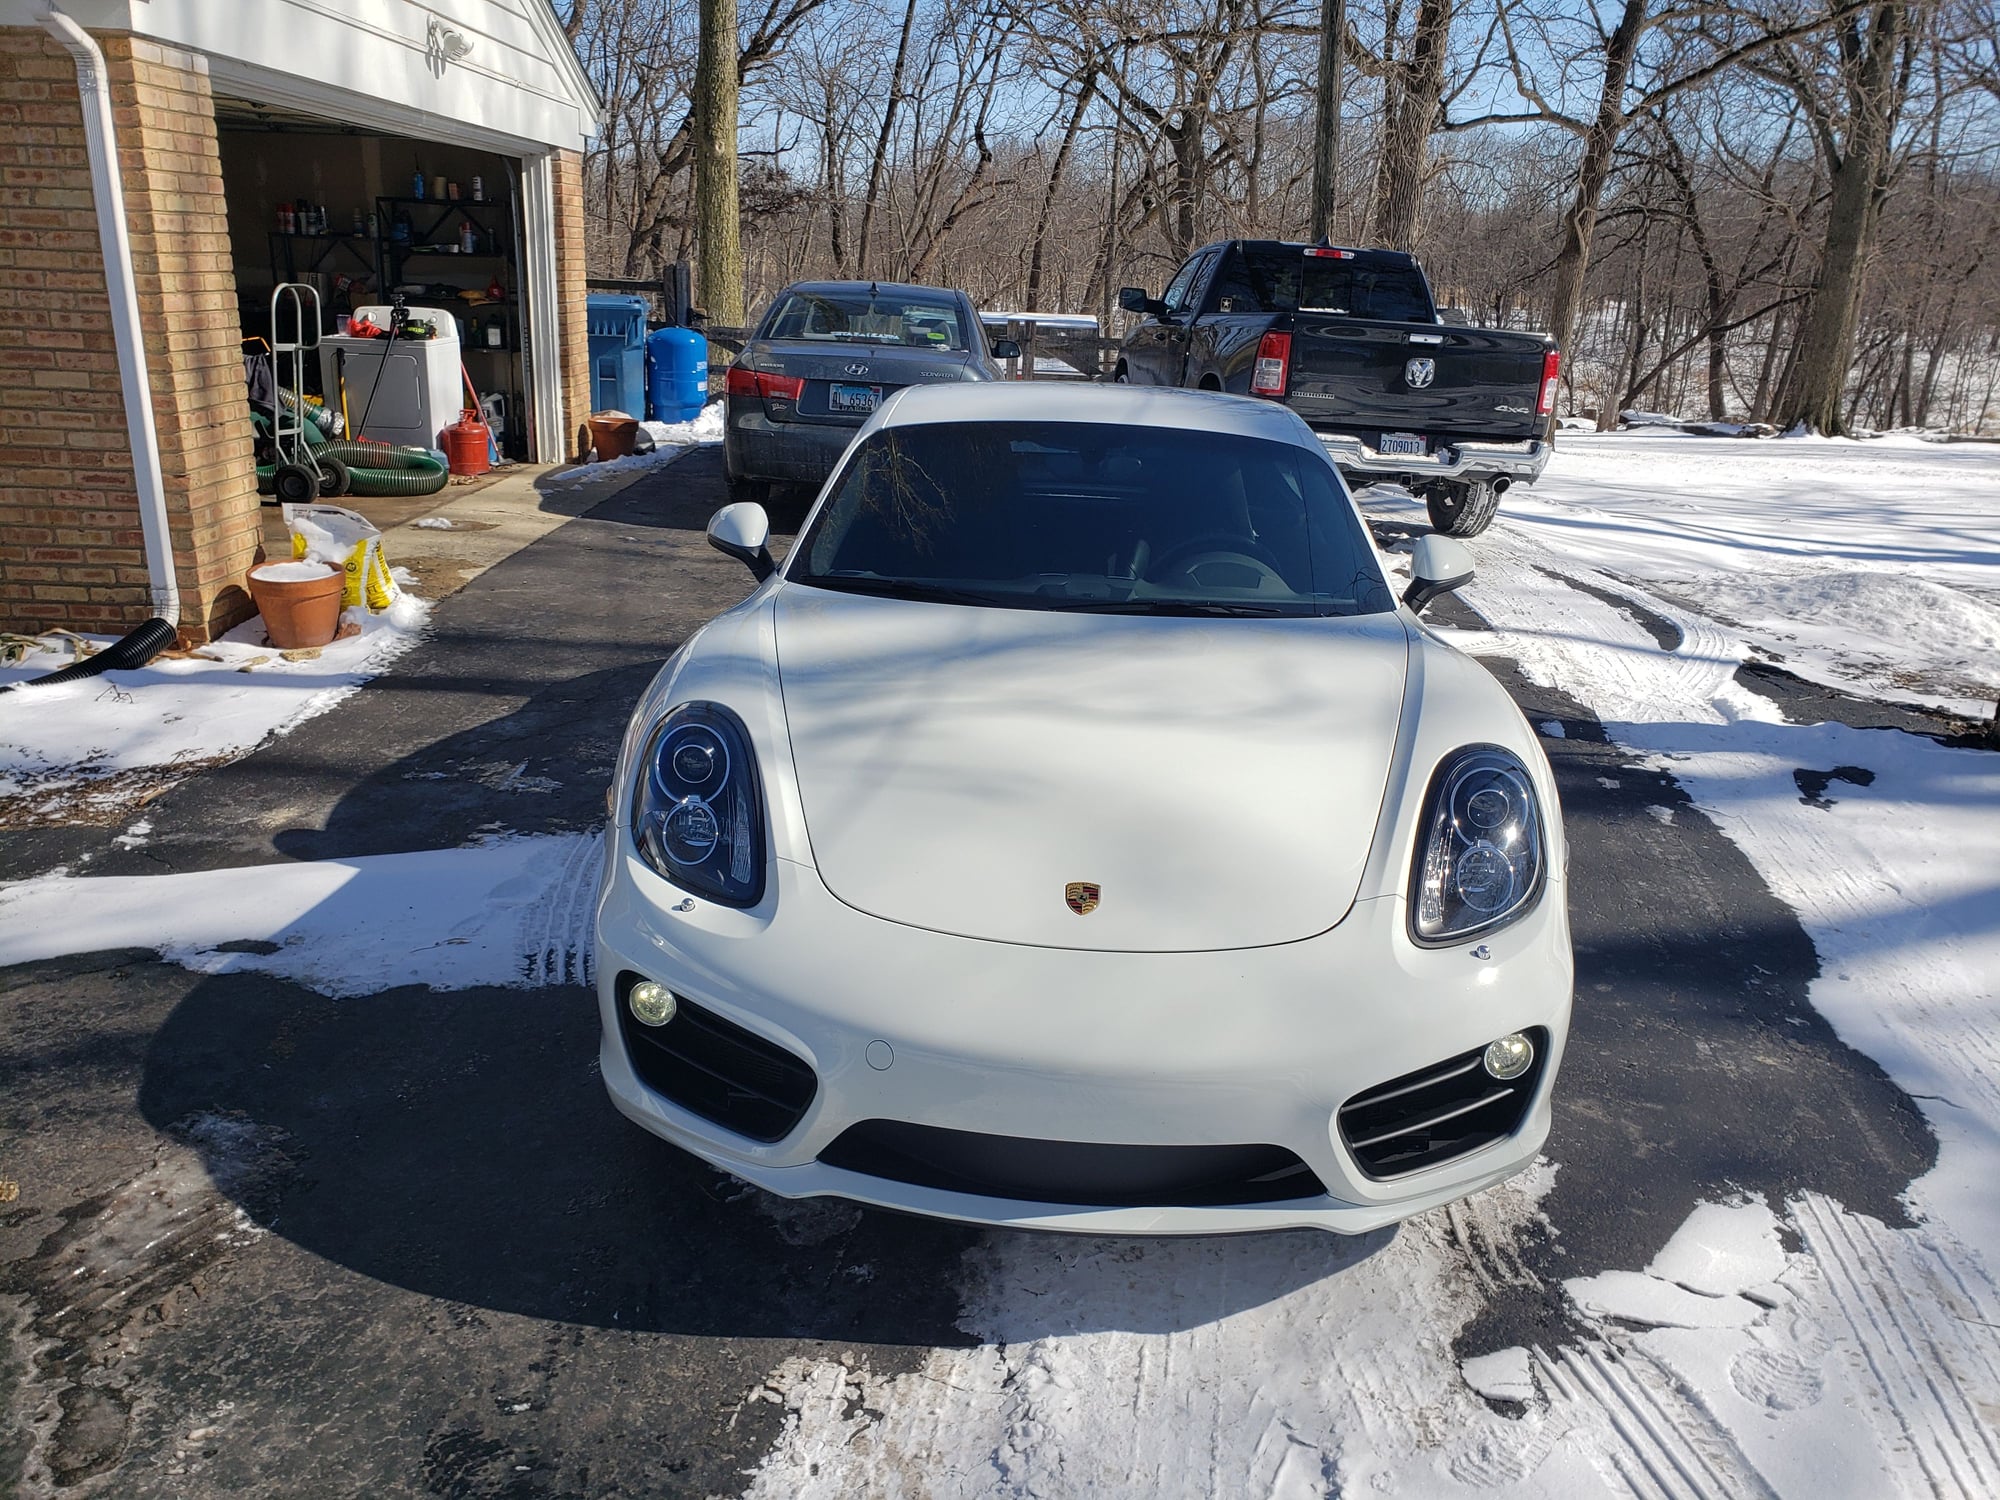 2014 Porsche Cayman - 2014 Cayman S - Used - VIN WPOAB2A89EK191332 - 36,300 Miles - 6 cyl - 2WD - Automatic - Coupe - White - Joliet, IL 60431, United States